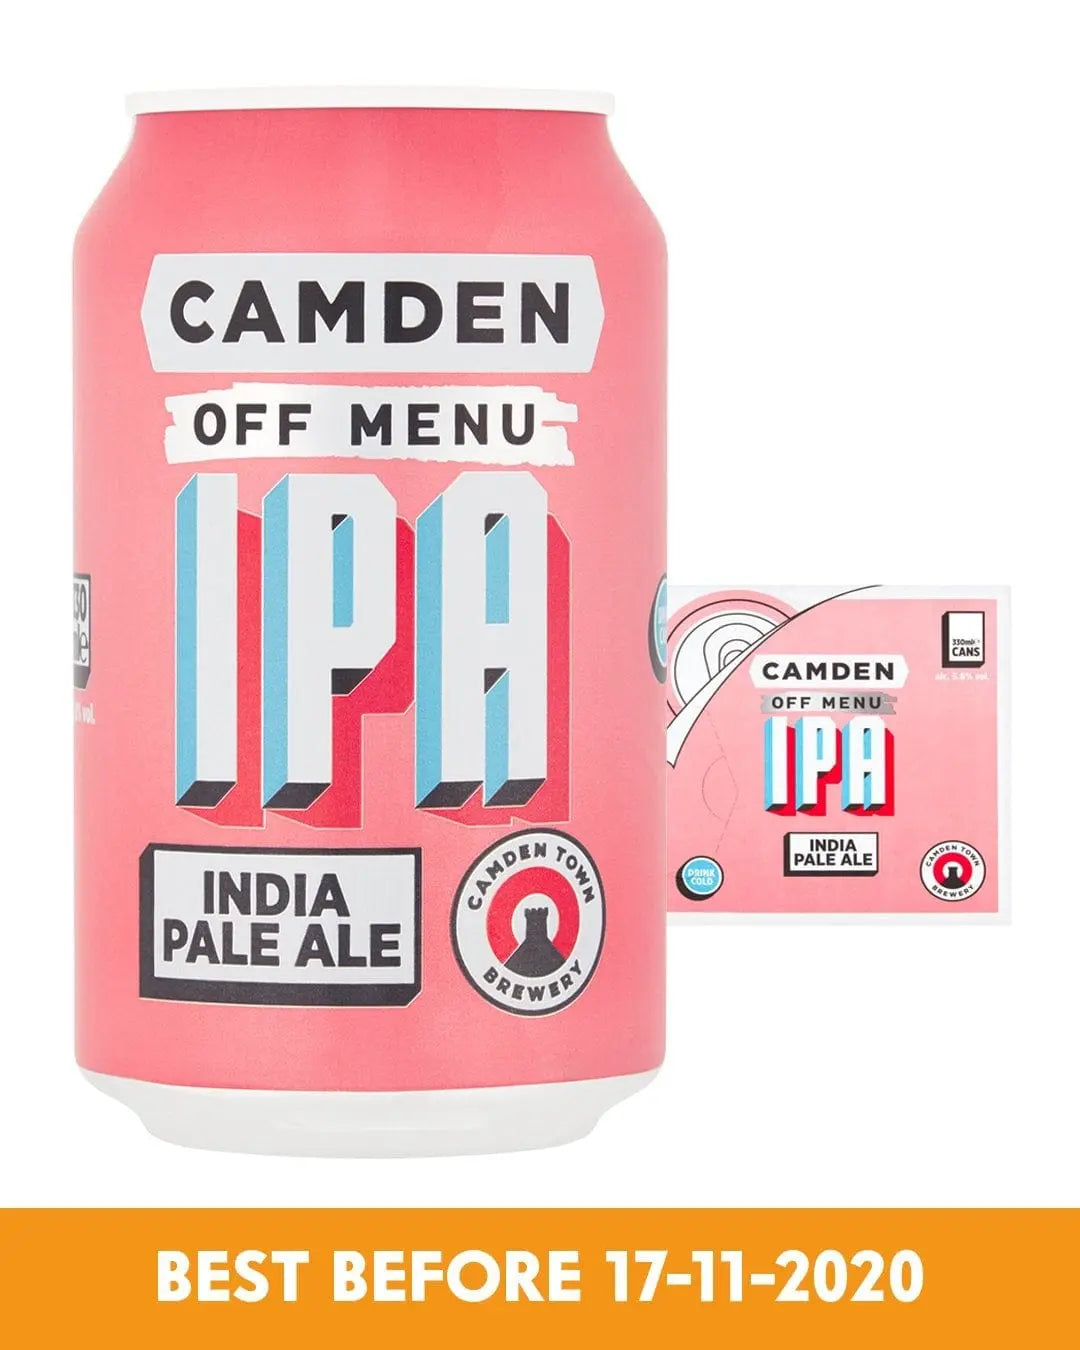 Camden Town Brewery Off Menu IPA Lager Can, 1 x 330 ml Beer